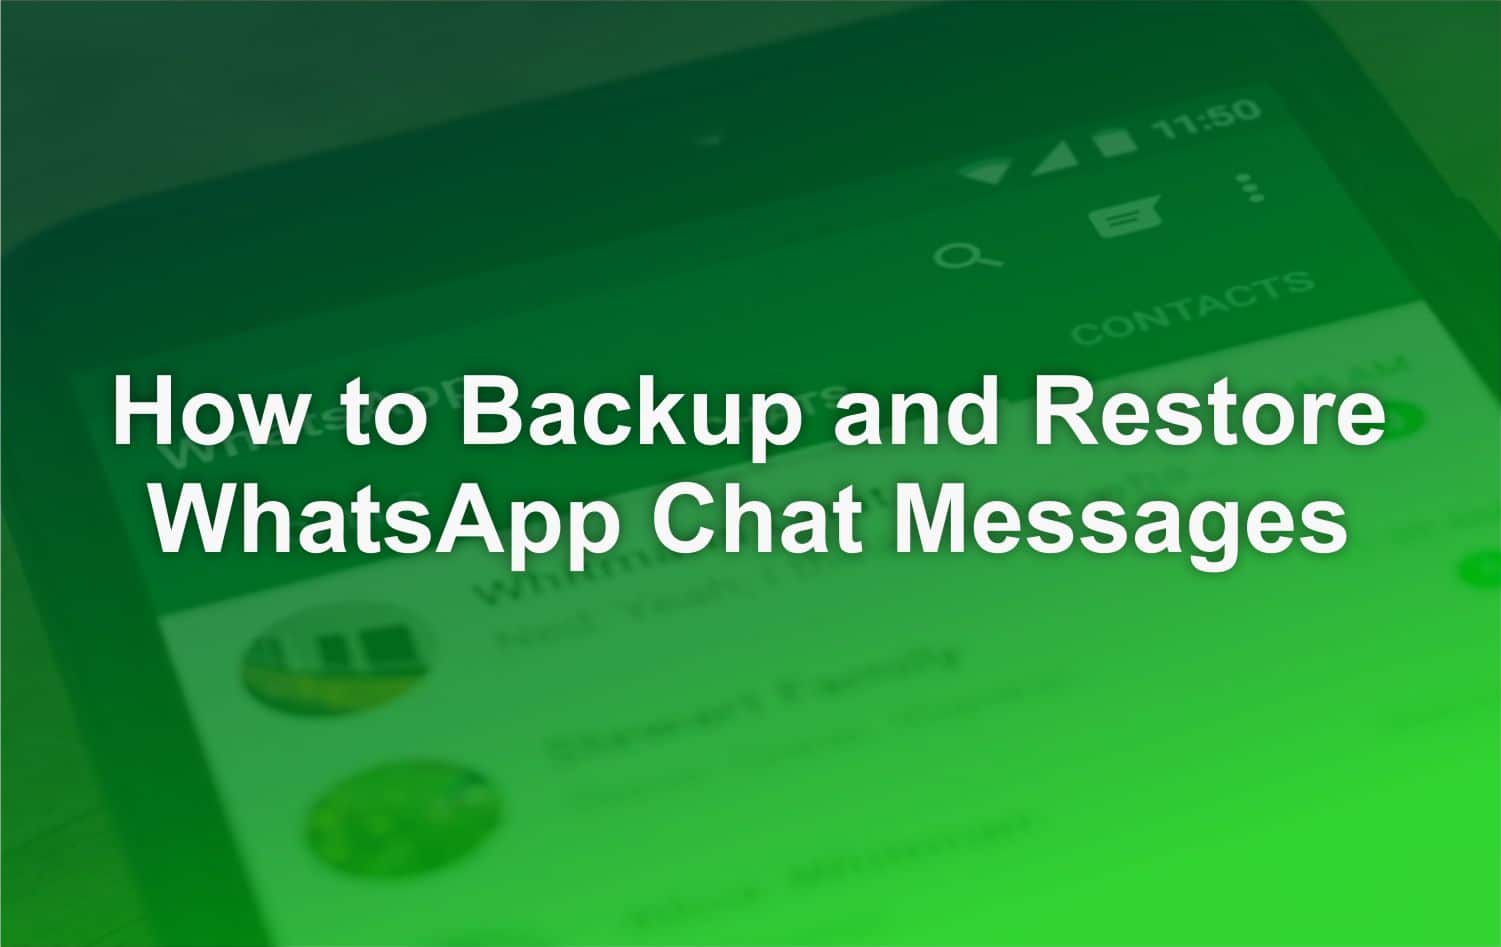 How to Backup and Restore WhatsApp Chat Messages with Google Drive